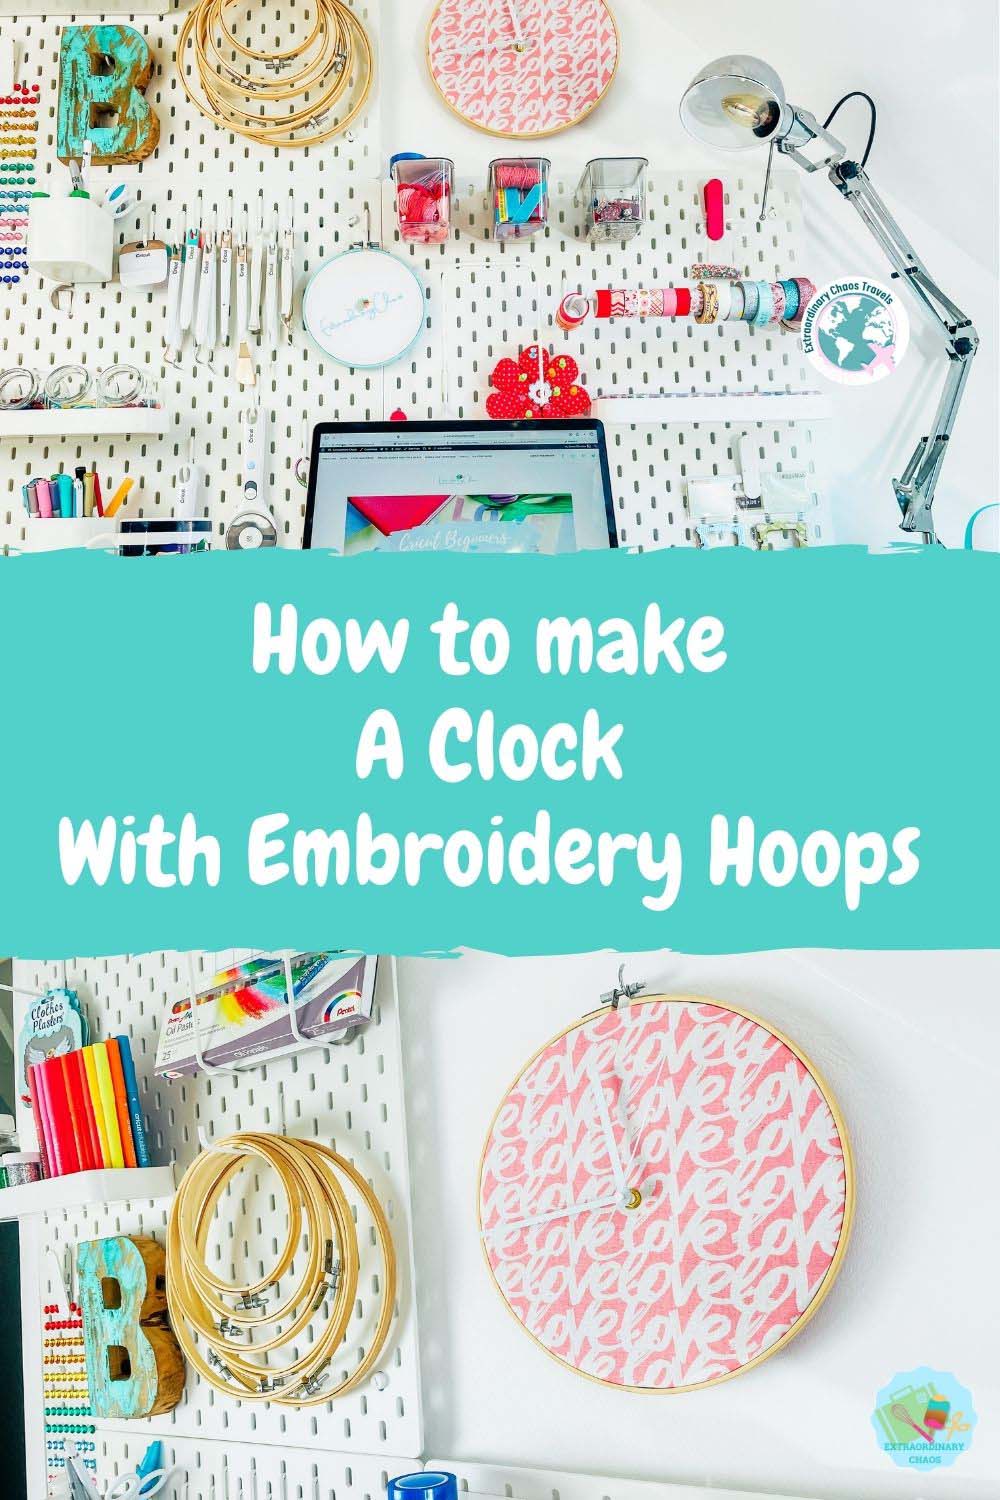 How to make an embroidery hoop clock